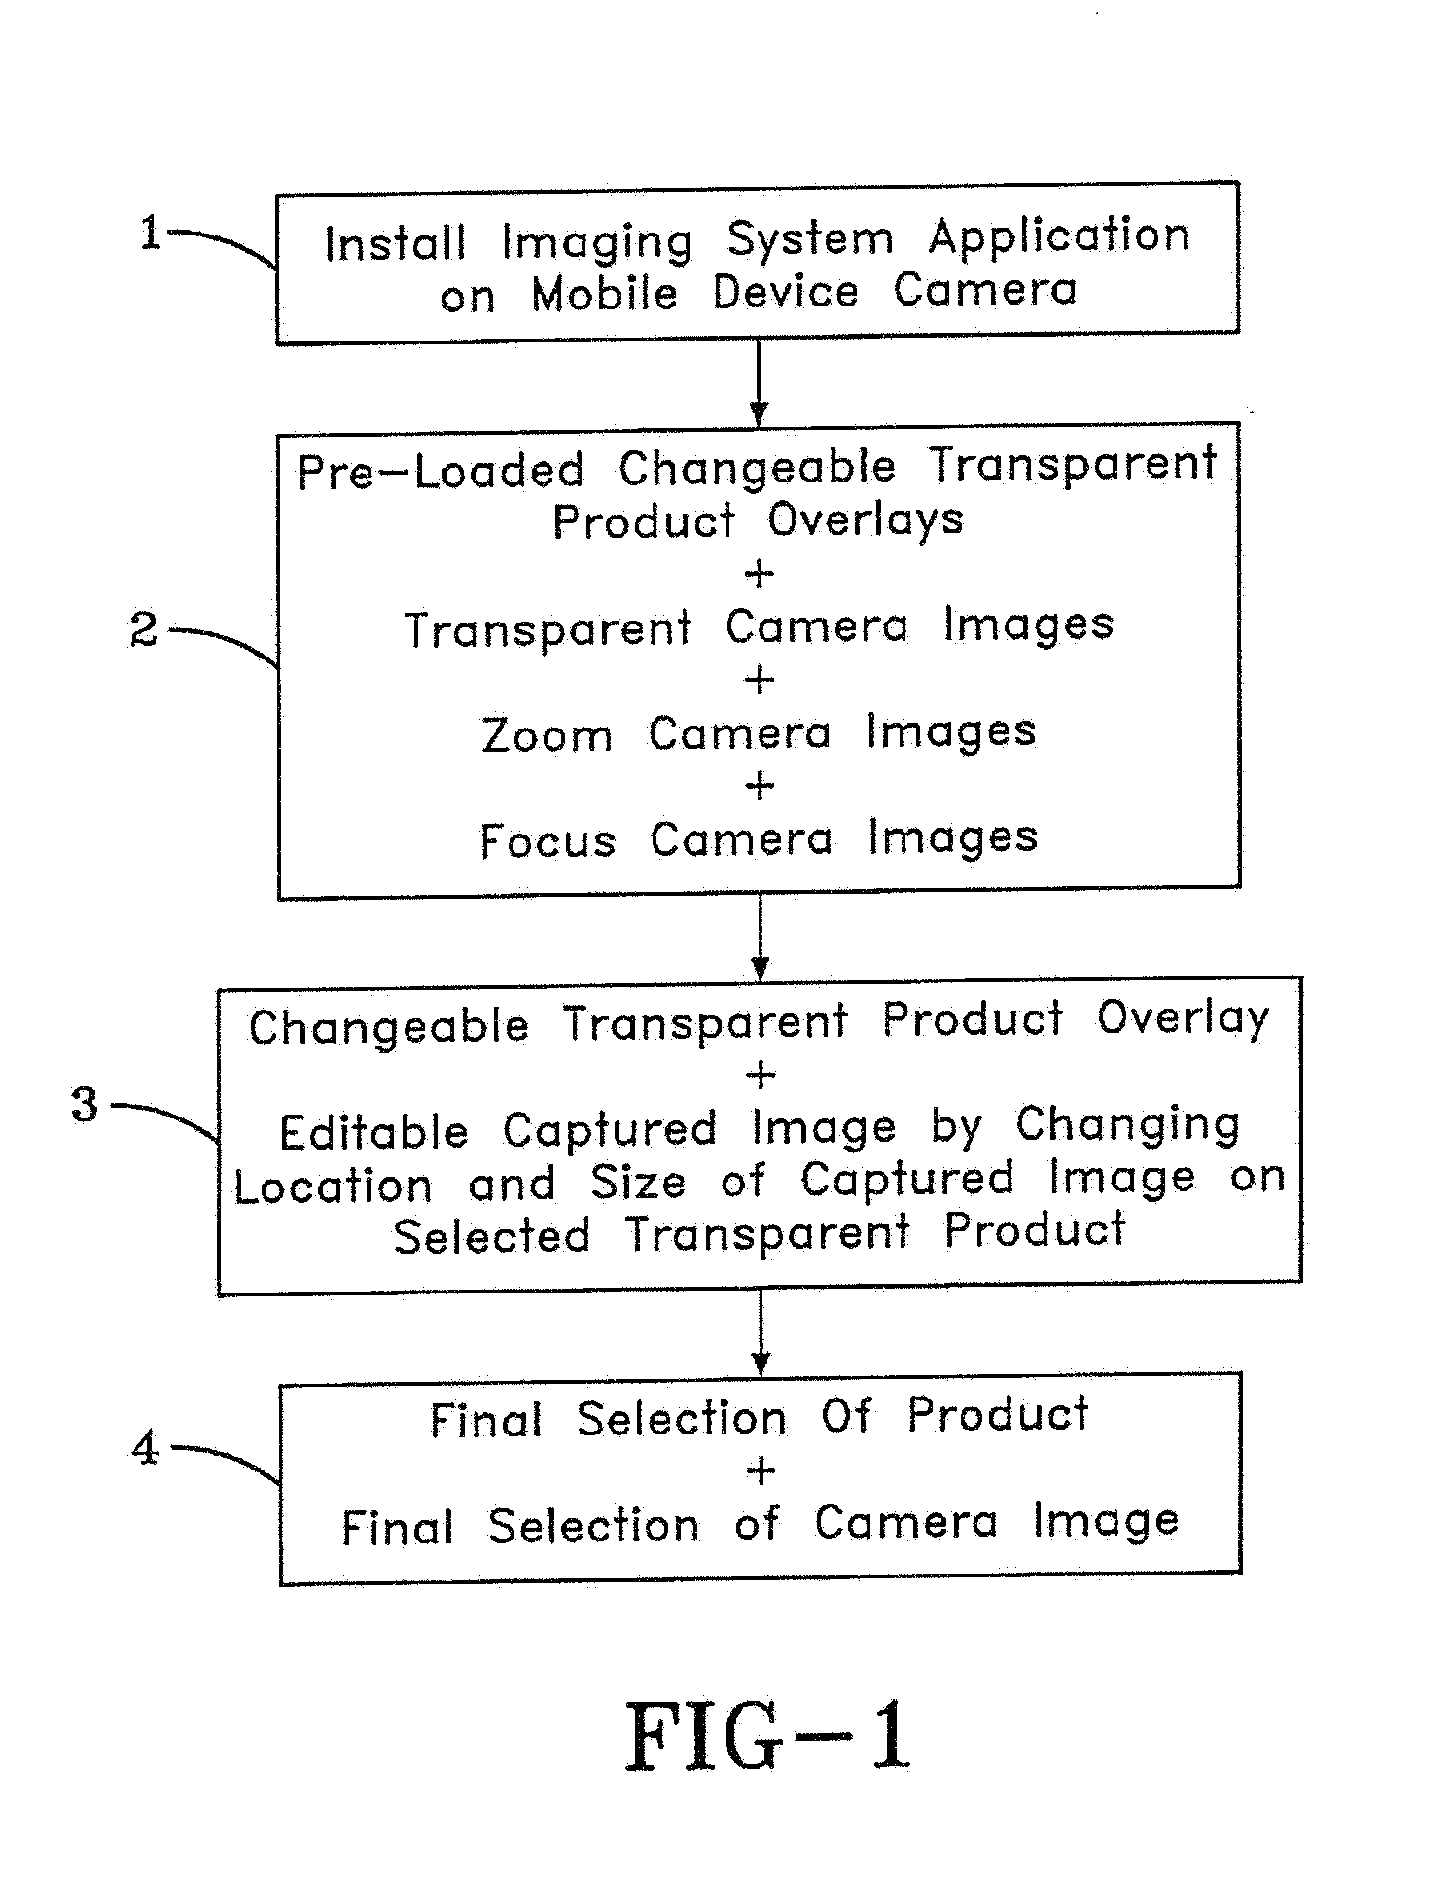 Transfer of mobile device camera image to an image-supporting surface